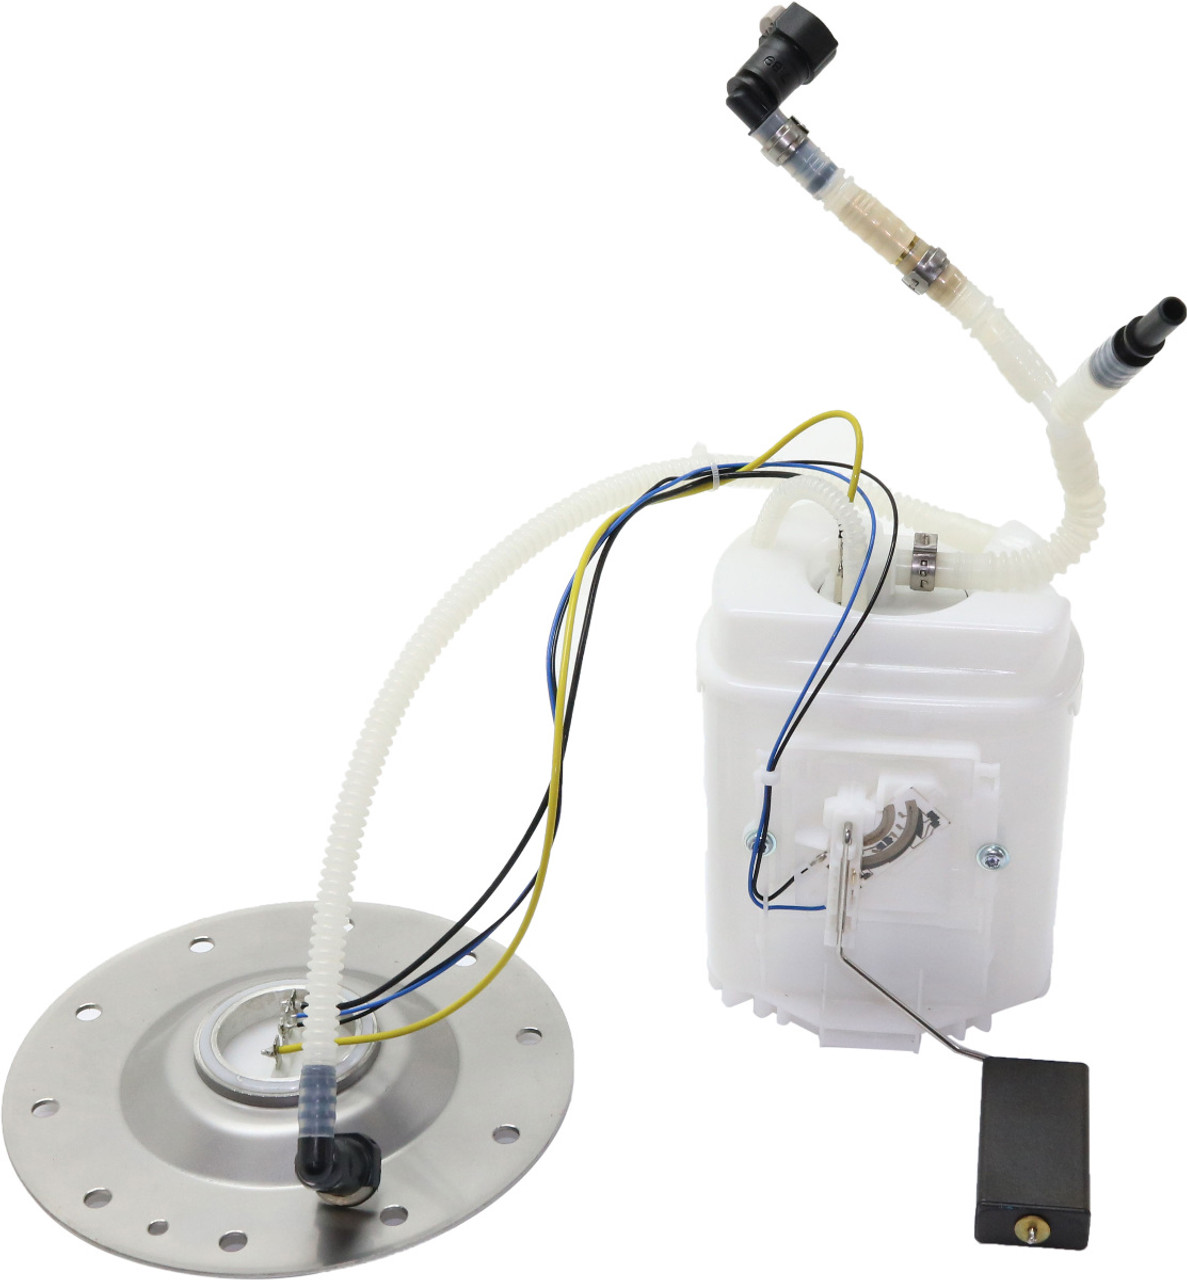 JETTA 02-05/BEETLE 02-10 FUEL PUMP MODULE ASSEMBLY, Electric, 4/5/6 Cyl. Engine, with Metal Fuel Tank